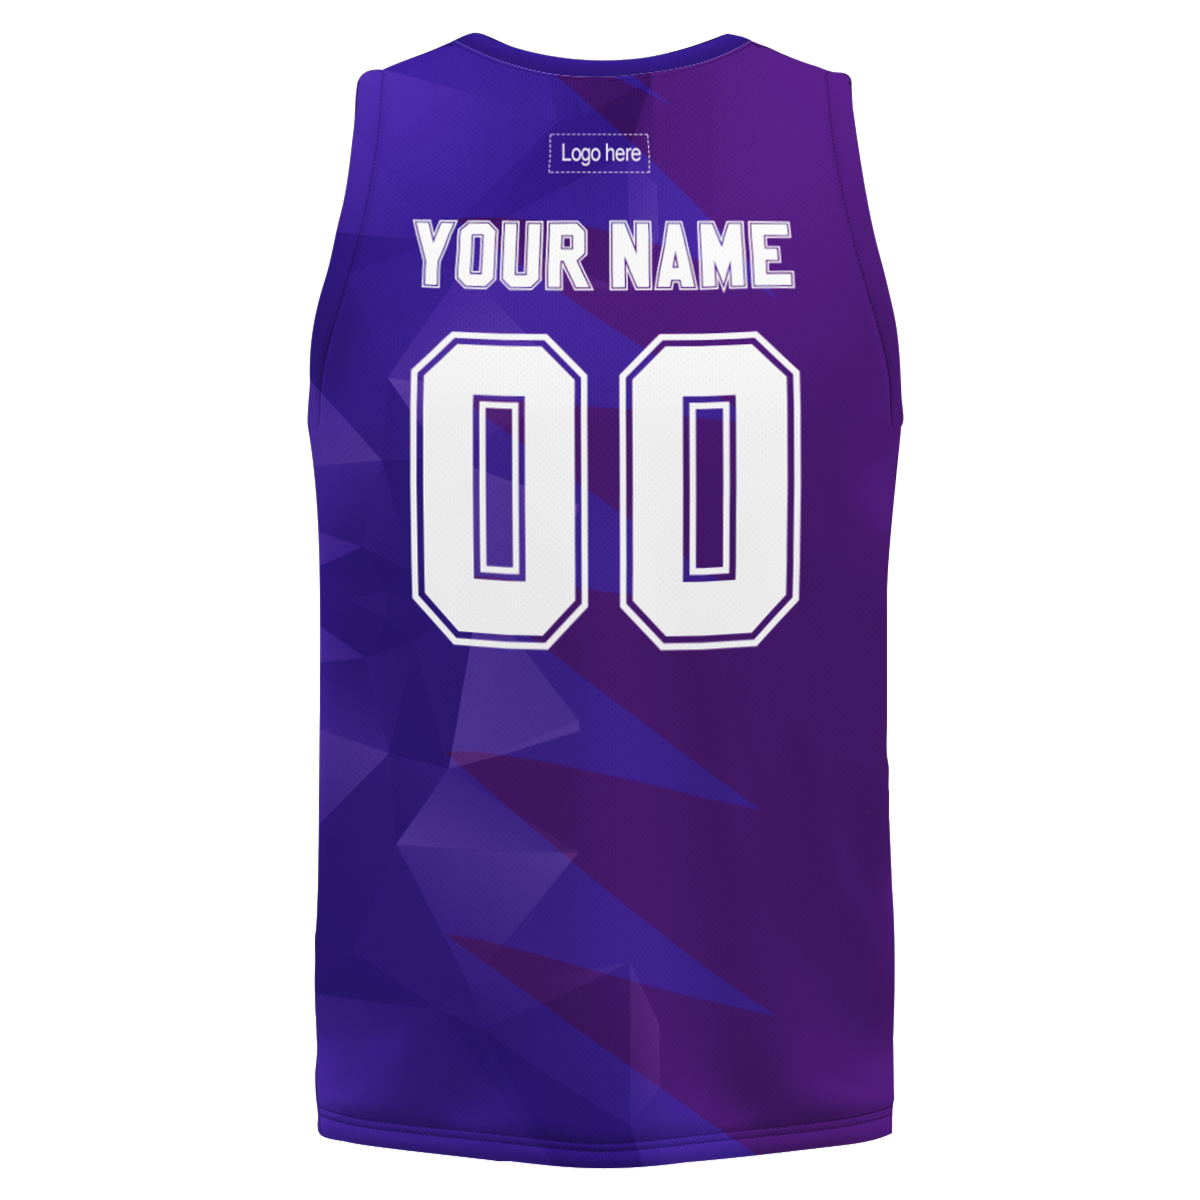 factory-custom-polyester-sublimation-basketball-jersey-shirts-printing-logo-basketball-suits-for-men-women-at-cj-pod-6